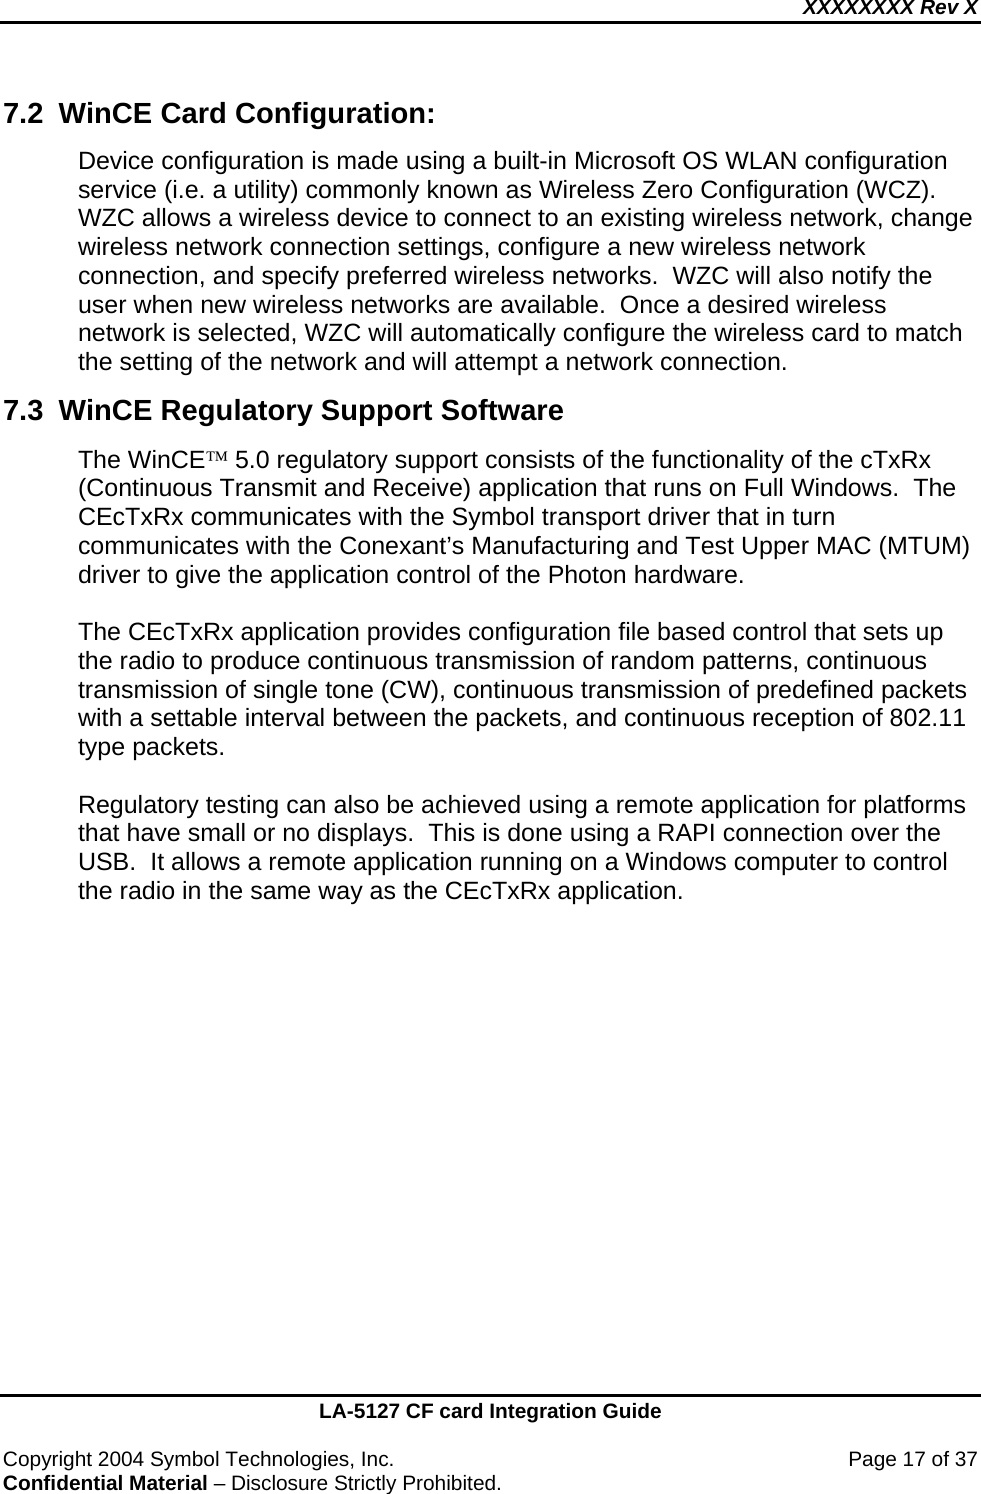 XXXXXXXX Rev X    LA-5127 CF card Integration Guide  Copyright 2004 Symbol Technologies, Inc.    Page 17 of 37 Confidential Material – Disclosure Strictly Prohibited. 7.2  WinCE Card Configuration: Device configuration is made using a built-in Microsoft OS WLAN configuration service (i.e. a utility) commonly known as Wireless Zero Configuration (WCZ).  WZC allows a wireless device to connect to an existing wireless network, change wireless network connection settings, configure a new wireless network connection, and specify preferred wireless networks.  WZC will also notify the user when new wireless networks are available.  Once a desired wireless network is selected, WZC will automatically configure the wireless card to match the setting of the network and will attempt a network connection. 7.3  WinCE Regulatory Support Software The WinCE™ 5.0 regulatory support consists of the functionality of the cTxRx (Continuous Transmit and Receive) application that runs on Full Windows.  The CEcTxRx communicates with the Symbol transport driver that in turn communicates with the Conexant’s Manufacturing and Test Upper MAC (MTUM) driver to give the application control of the Photon hardware.  The CEcTxRx application provides configuration file based control that sets up the radio to produce continuous transmission of random patterns, continuous transmission of single tone (CW), continuous transmission of predefined packets with a settable interval between the packets, and continuous reception of 802.11 type packets.    Regulatory testing can also be achieved using a remote application for platforms that have small or no displays.  This is done using a RAPI connection over the USB.  It allows a remote application running on a Windows computer to control the radio in the same way as the CEcTxRx application.     